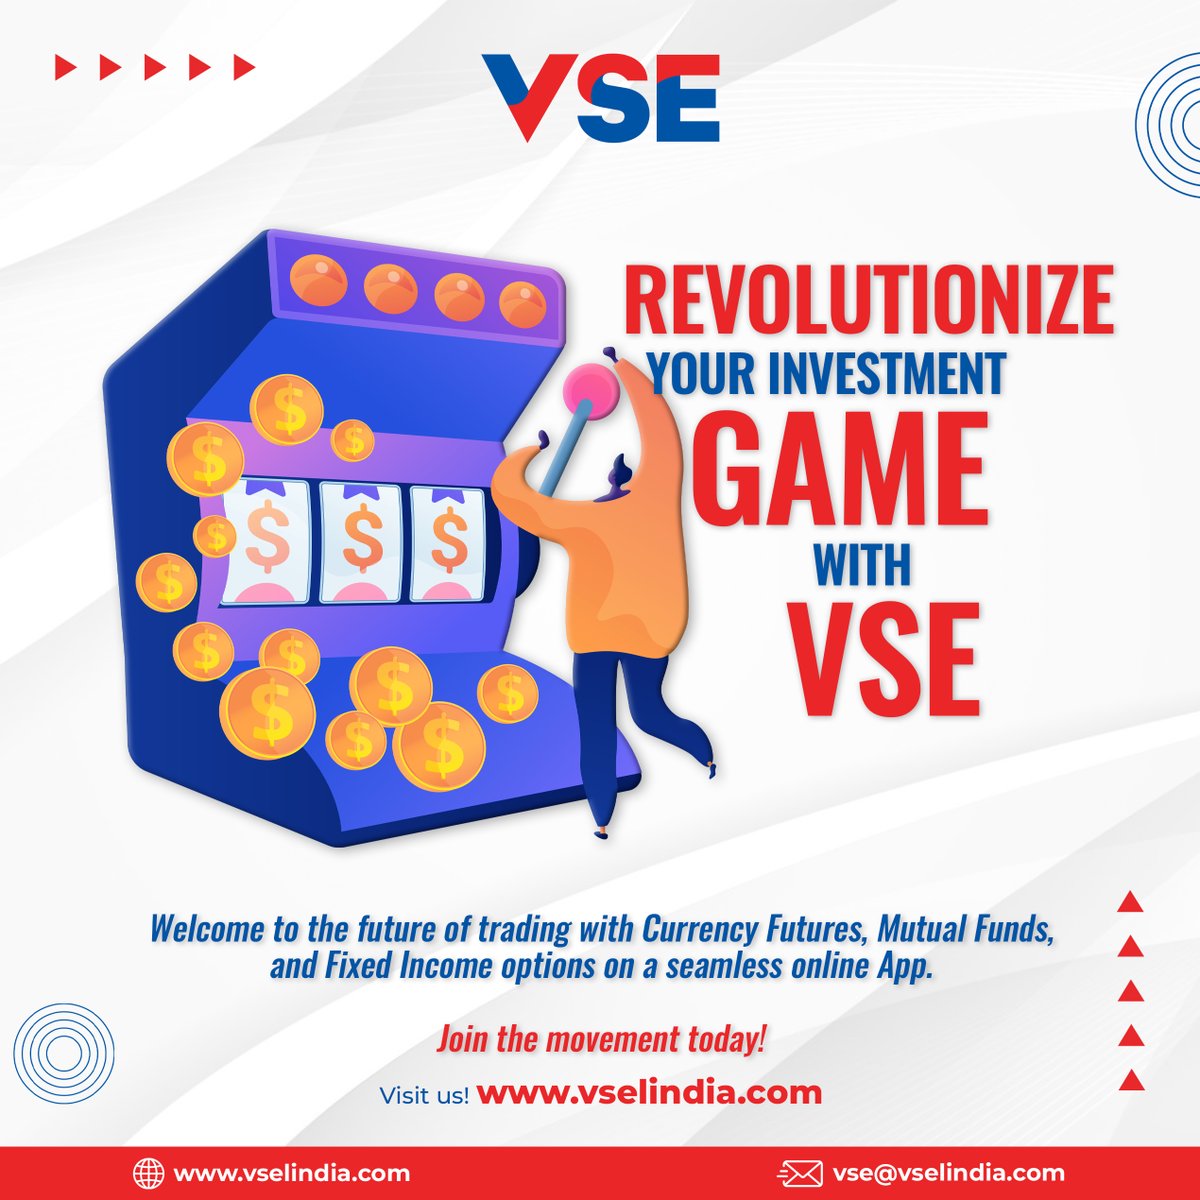 #VSEApp opens doors to the future of trading, empowering you with #CurrencyFutures, #MutualFunds, and #FixedIncome options. 

Discover the #investment game-changer and become a part of the future of #trading. 

#InvestmentRevolution #VSE #StocksToBuy #stockmarket #traders #invest